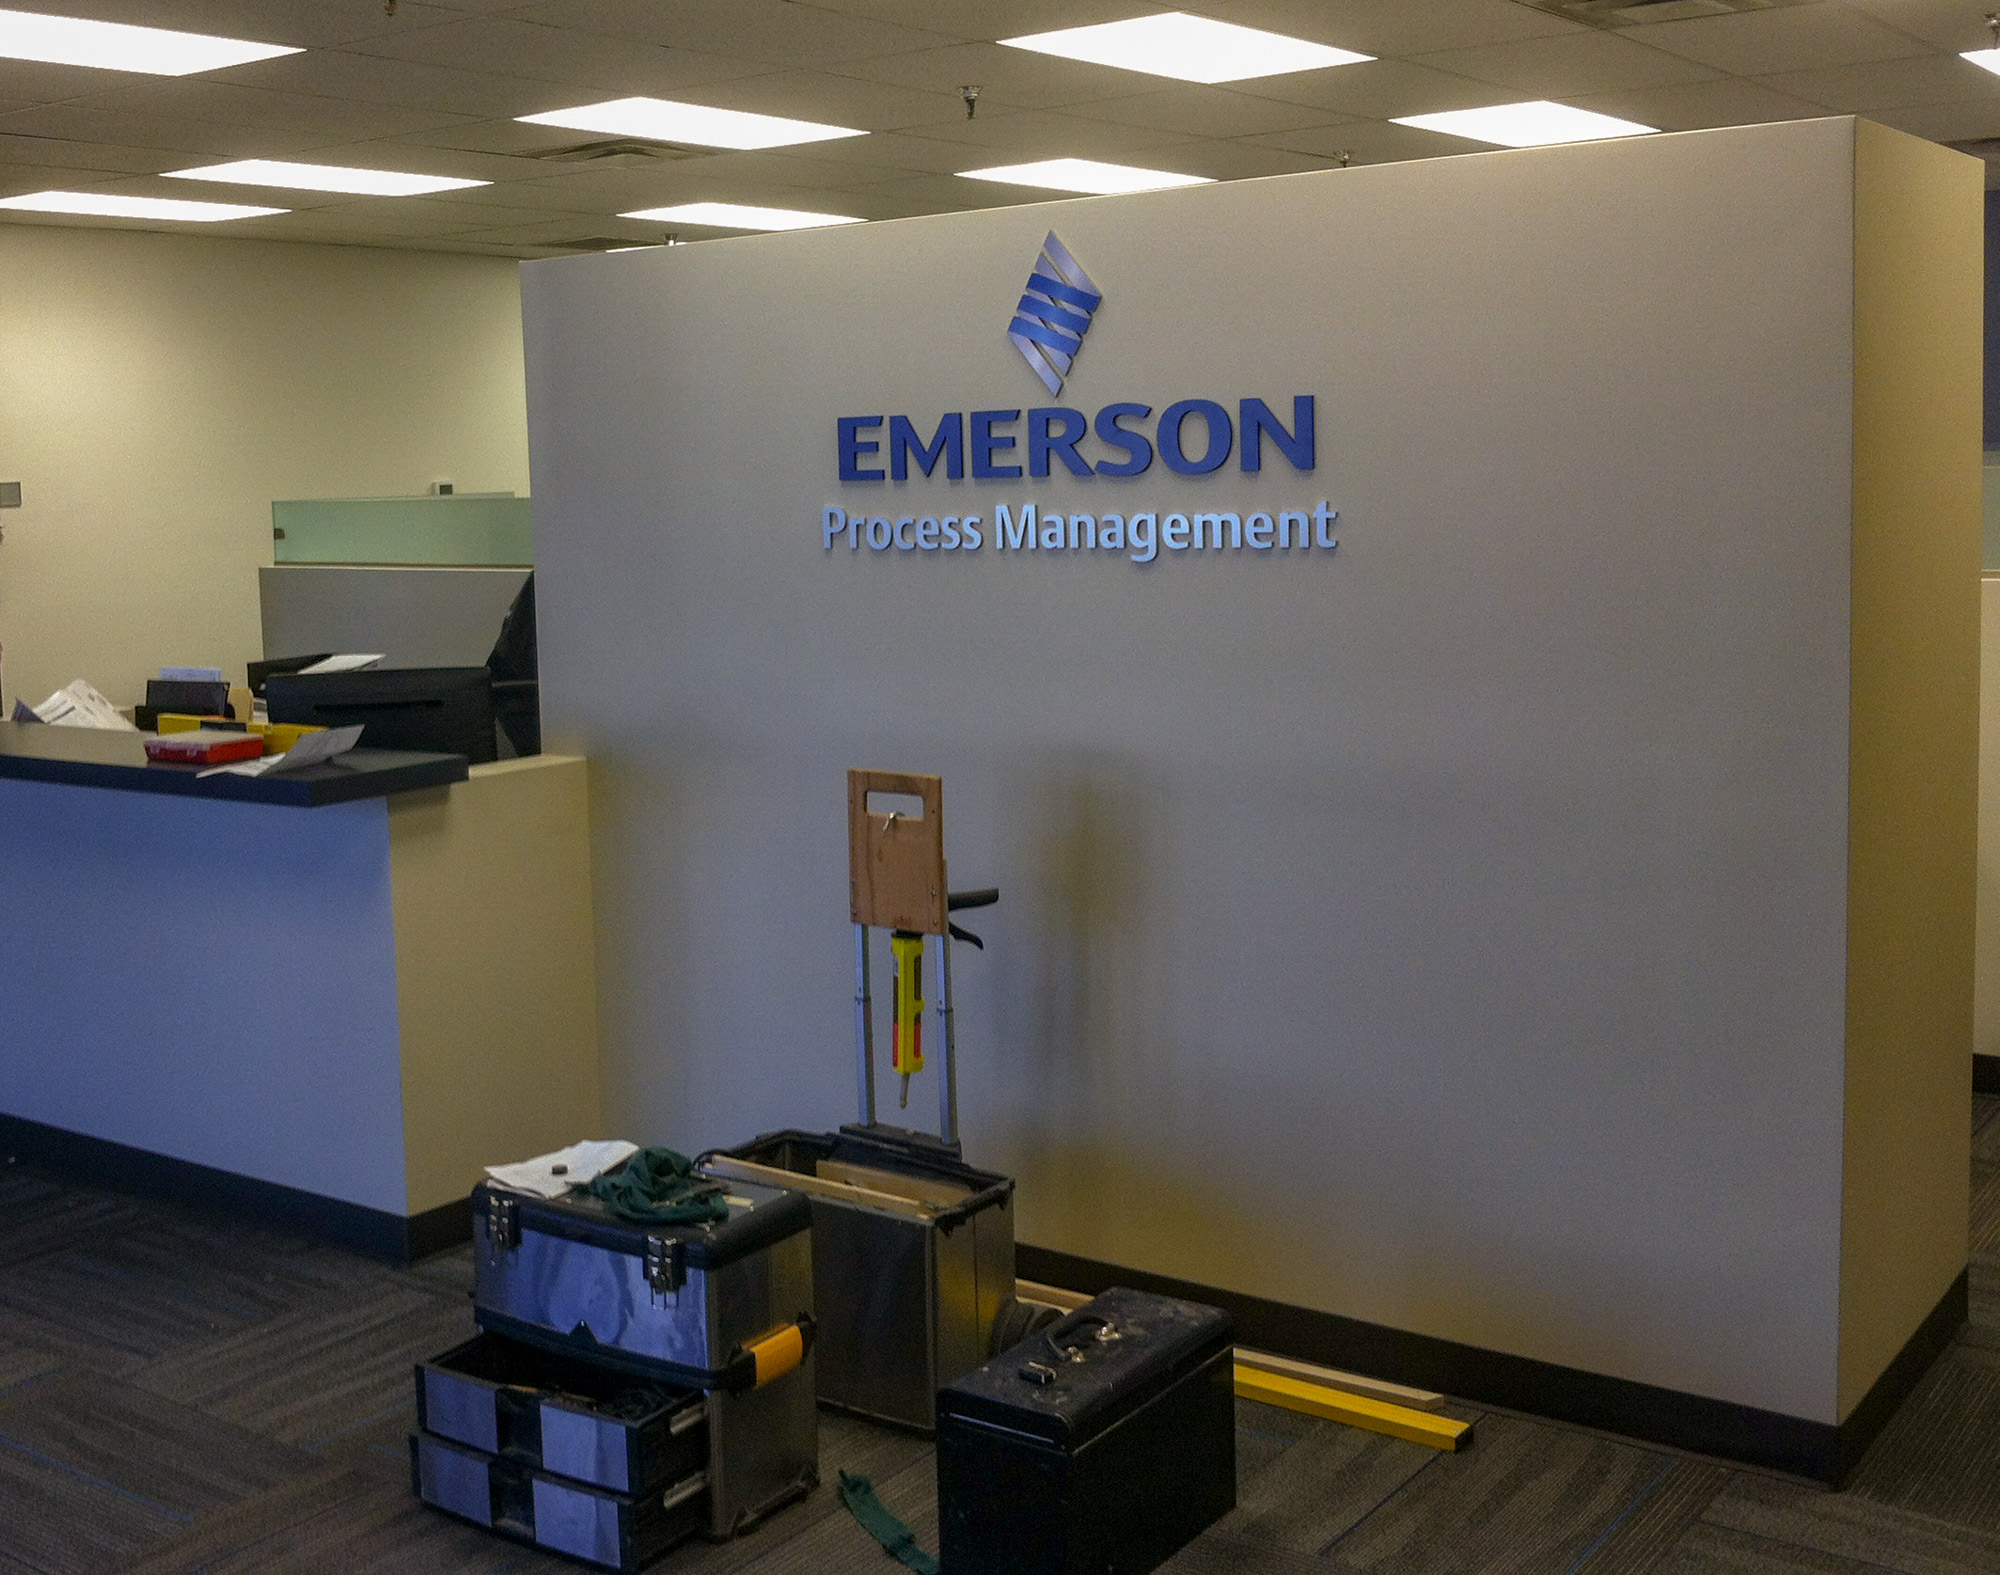 http://www.paradigm.group/wp-content/uploads/2015/05/Emerson-Office-for-web-1.jpg